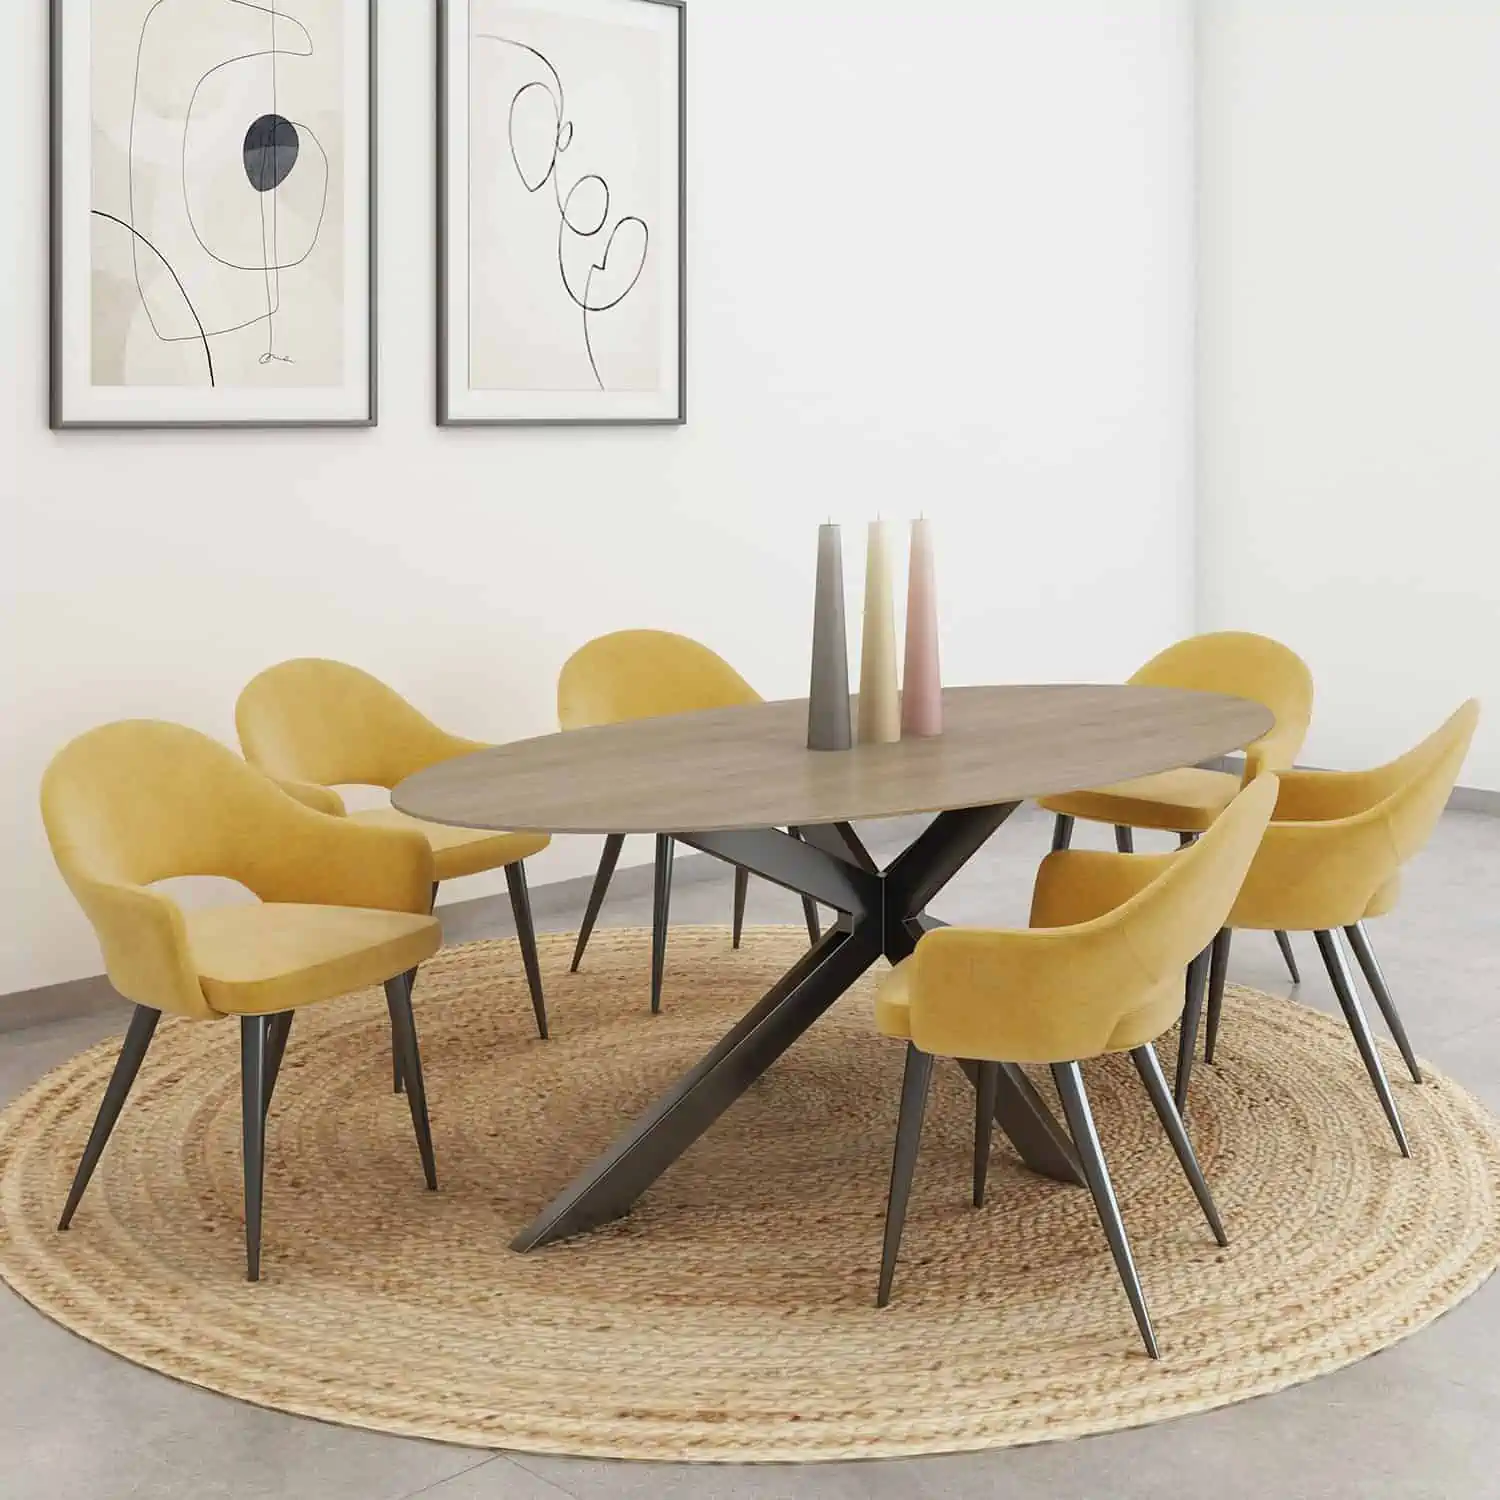 Wooden oval top dining table with 6 yellow chairs, placed on a rug in a room with white walls